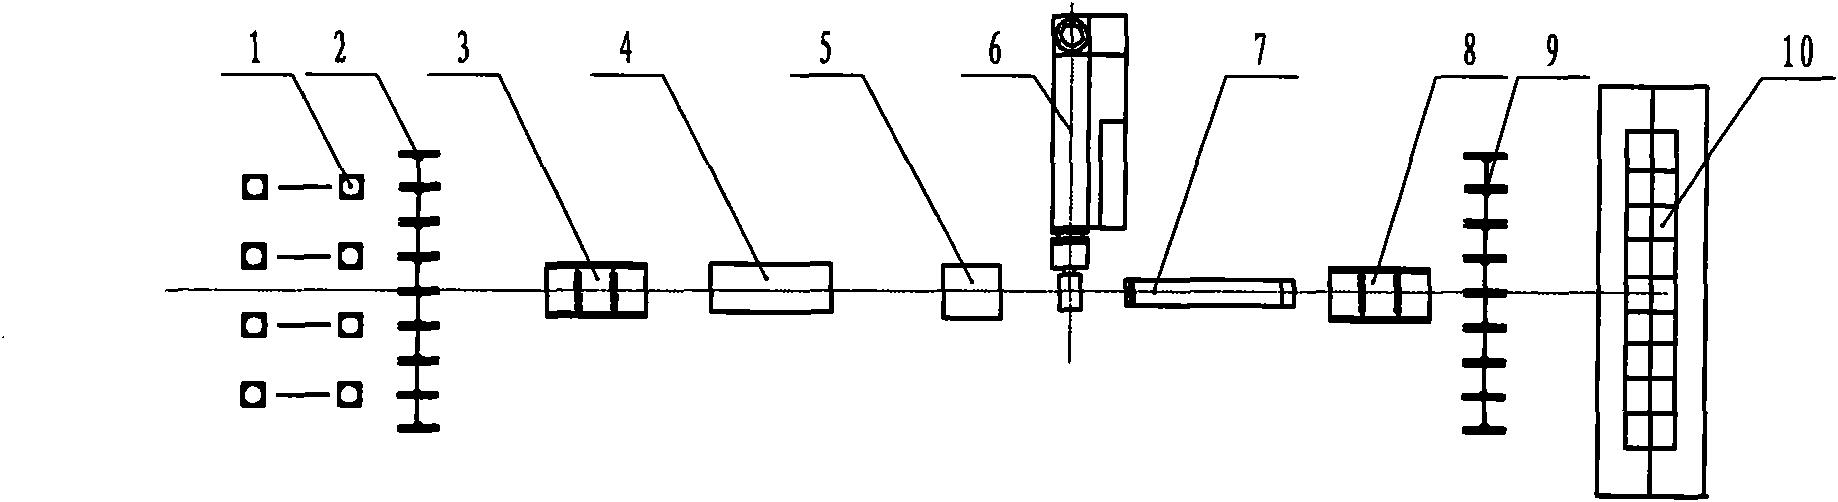 Production equipment and process for laminating film on fibers